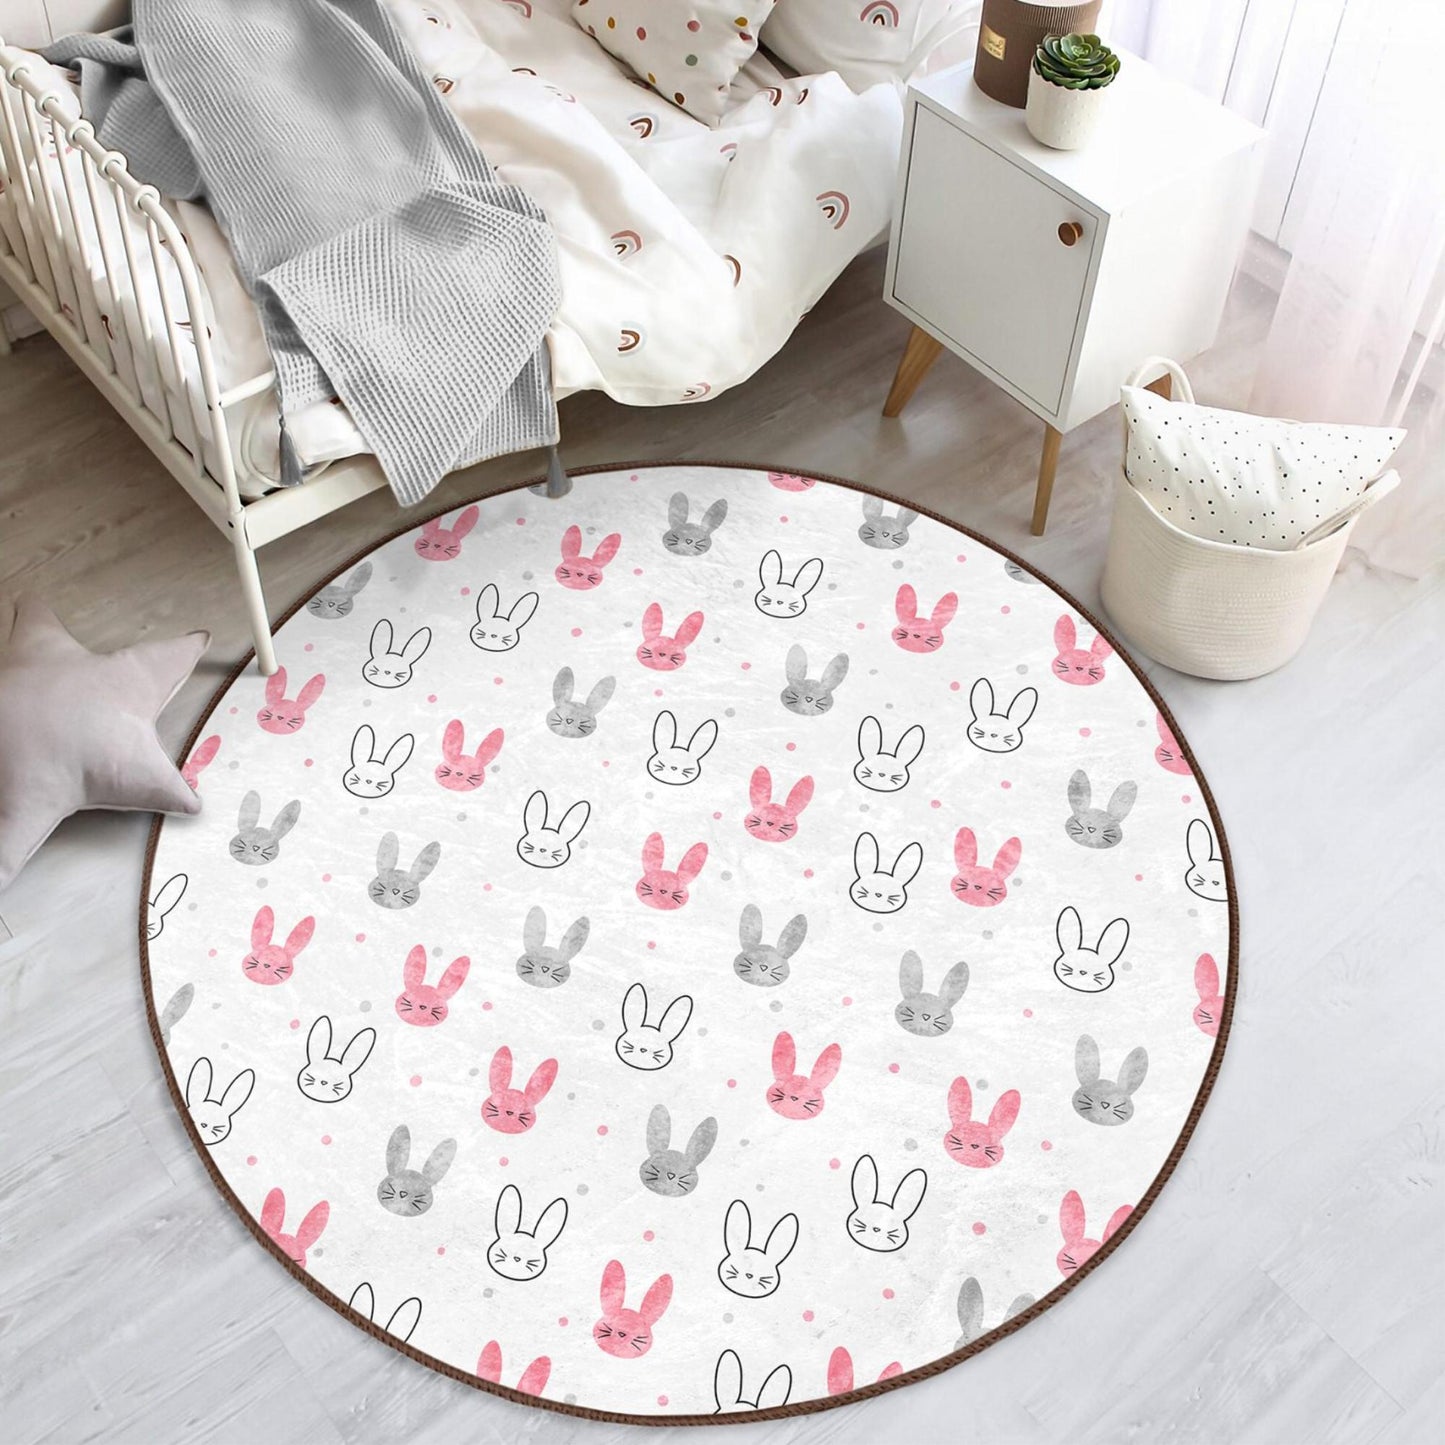 Soft and cozy rug adorned with adorable rabbit prints for children's spaces.